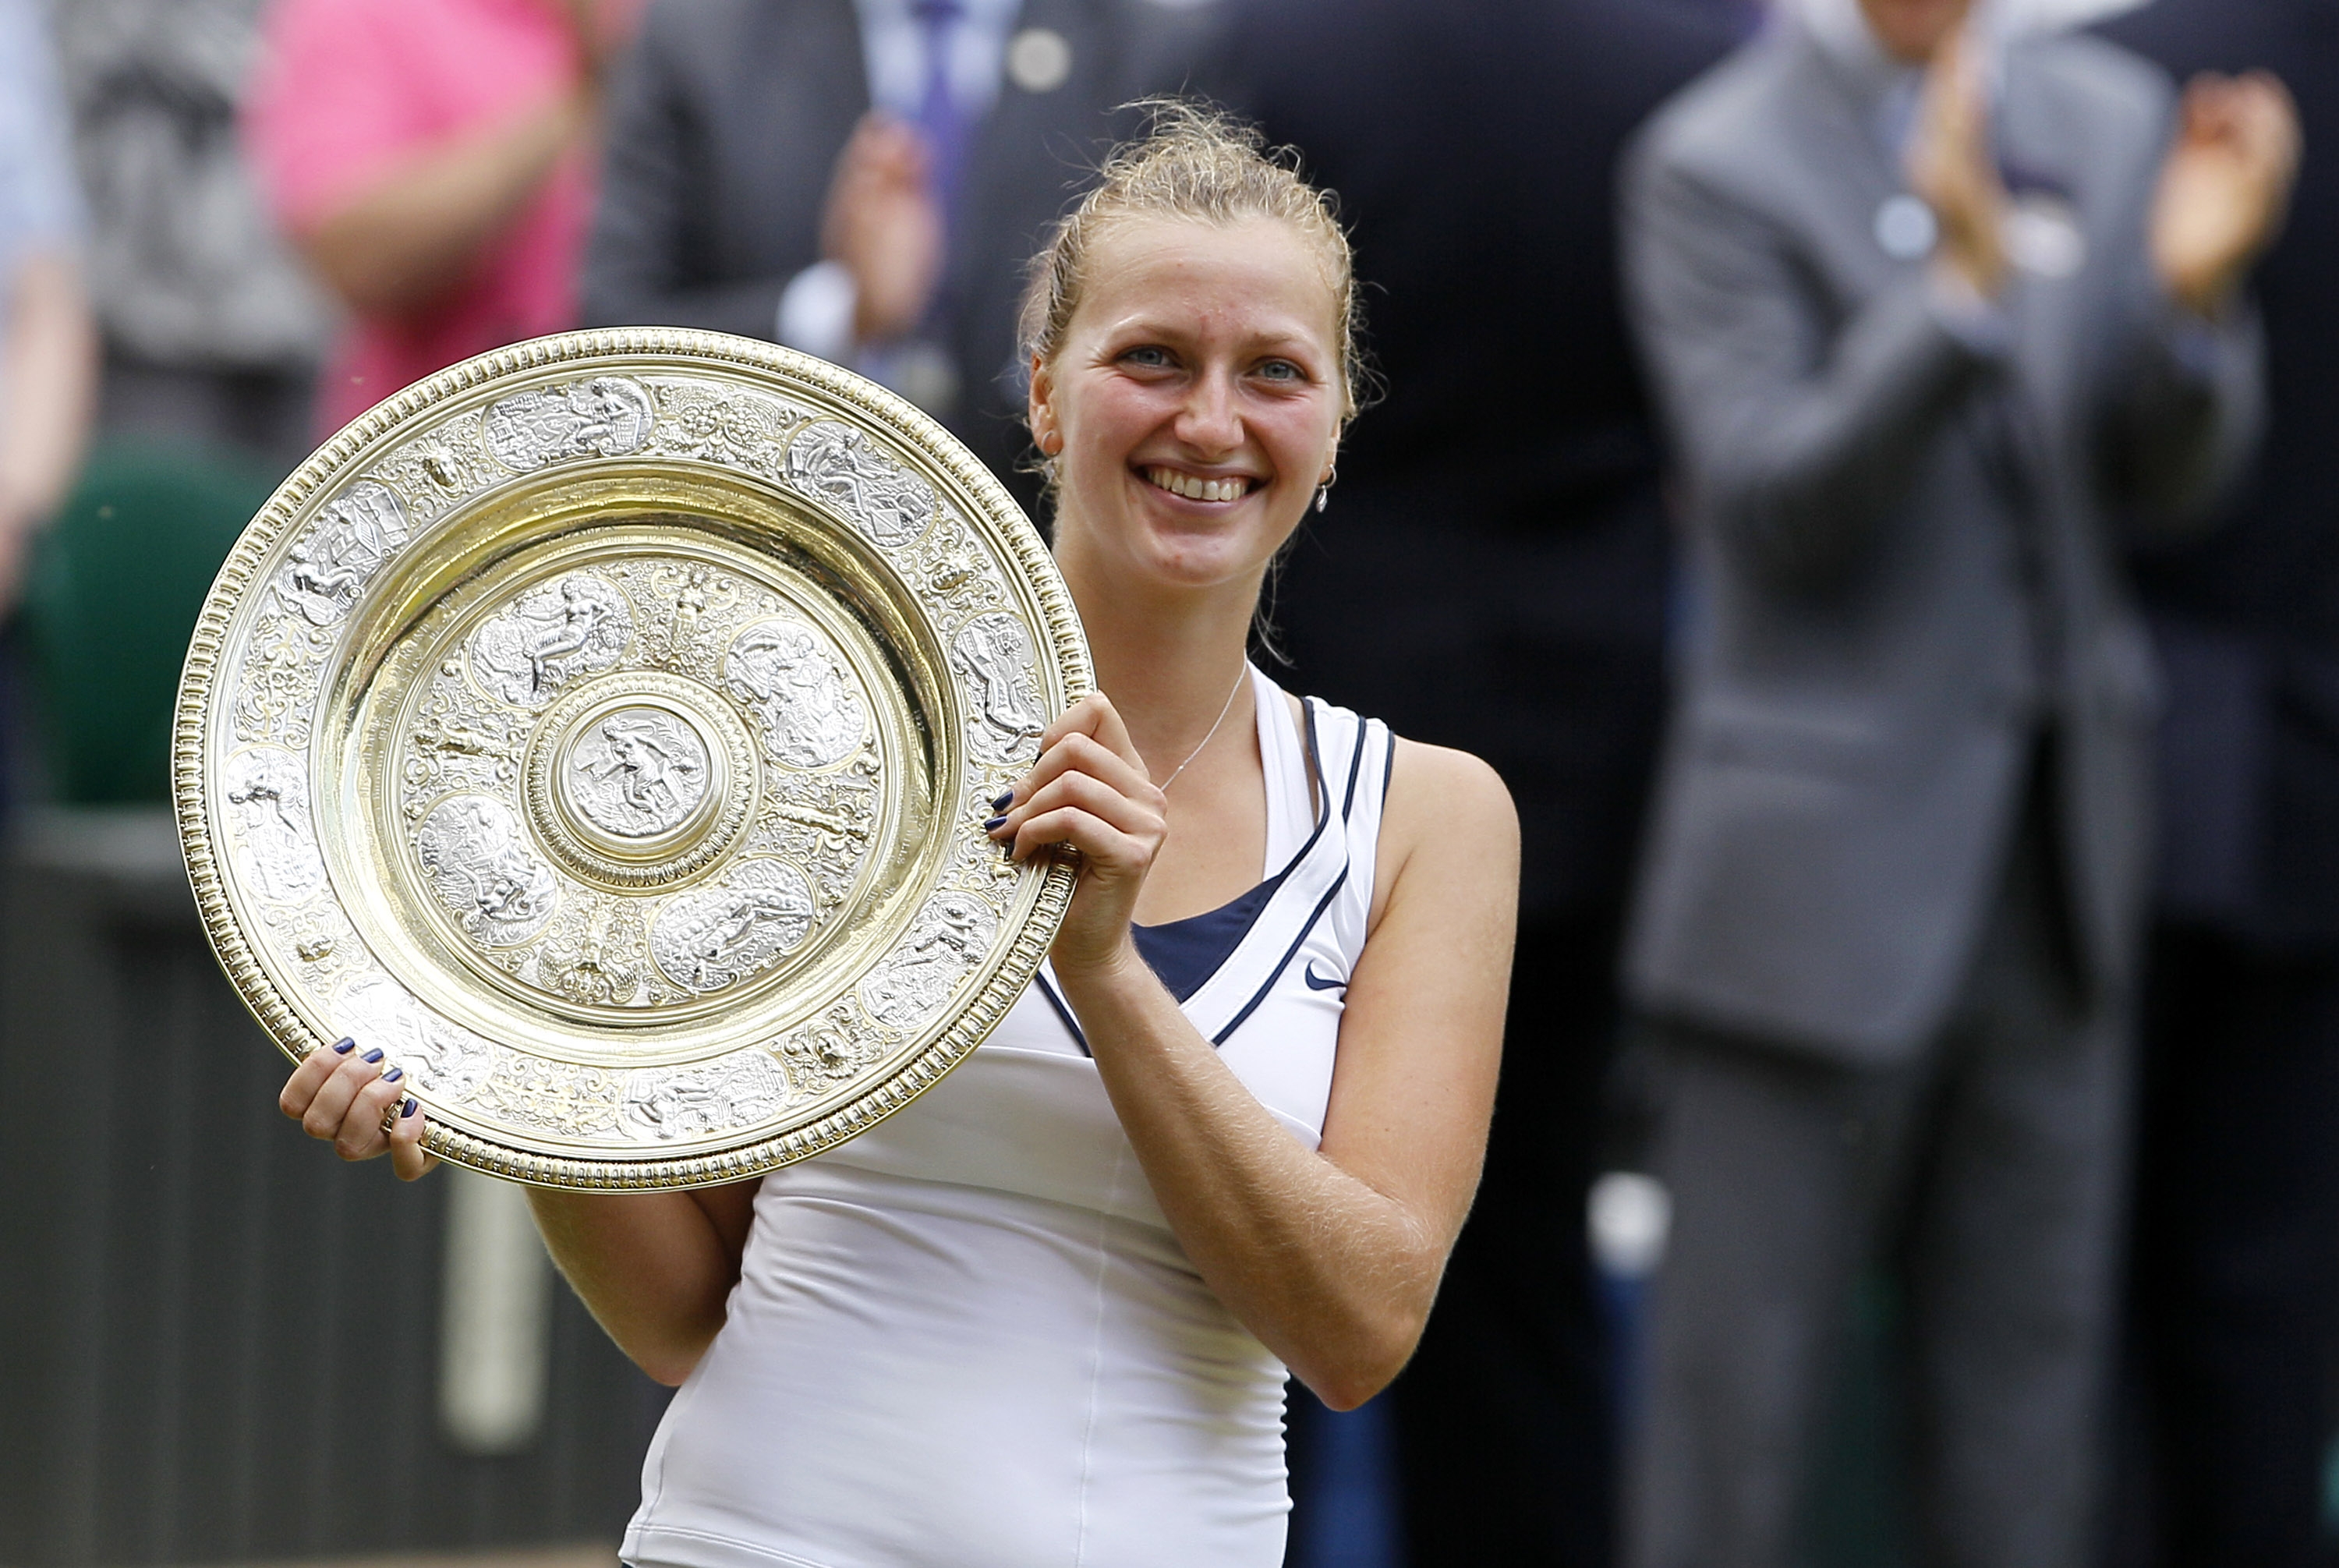 Czech Republic's Petra Kvitova holds the Ladies winning trophy after beating Maria Sharapova of Russia in the Women's Final of the 125th Wimbledon Championships at the All England Lawn Tennis Championships at Wimbledon, London, July 2, 2011.